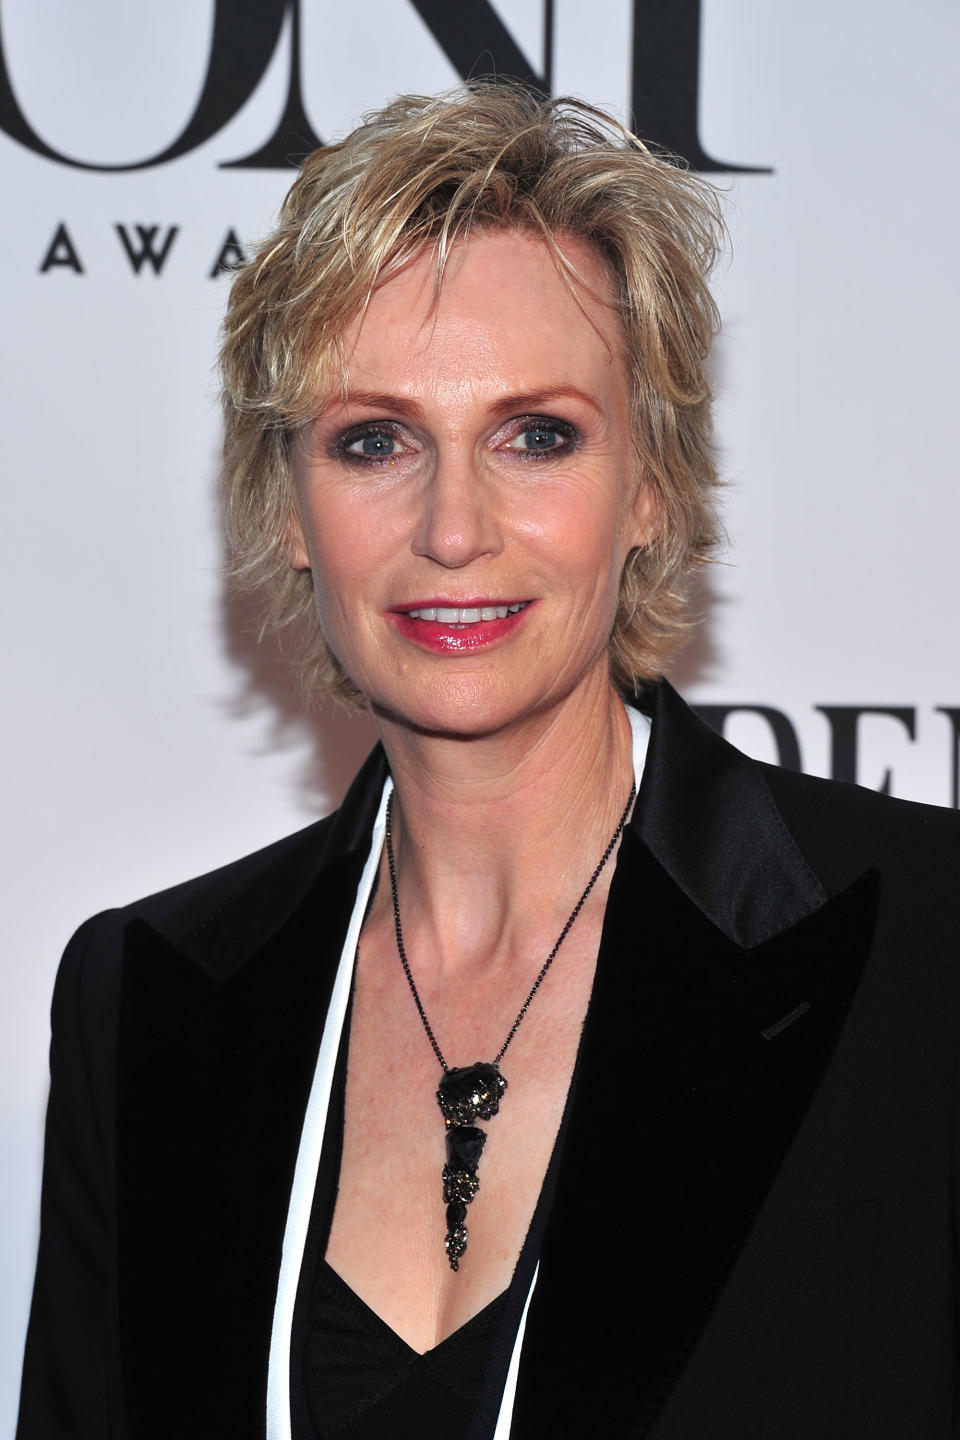 Jane Lynch arrives on the red carpet at the 67th Annual Tony Awards, on Sunday, June 9, 2013 in New York. (Photo by Charles Sykes/Invision/AP)